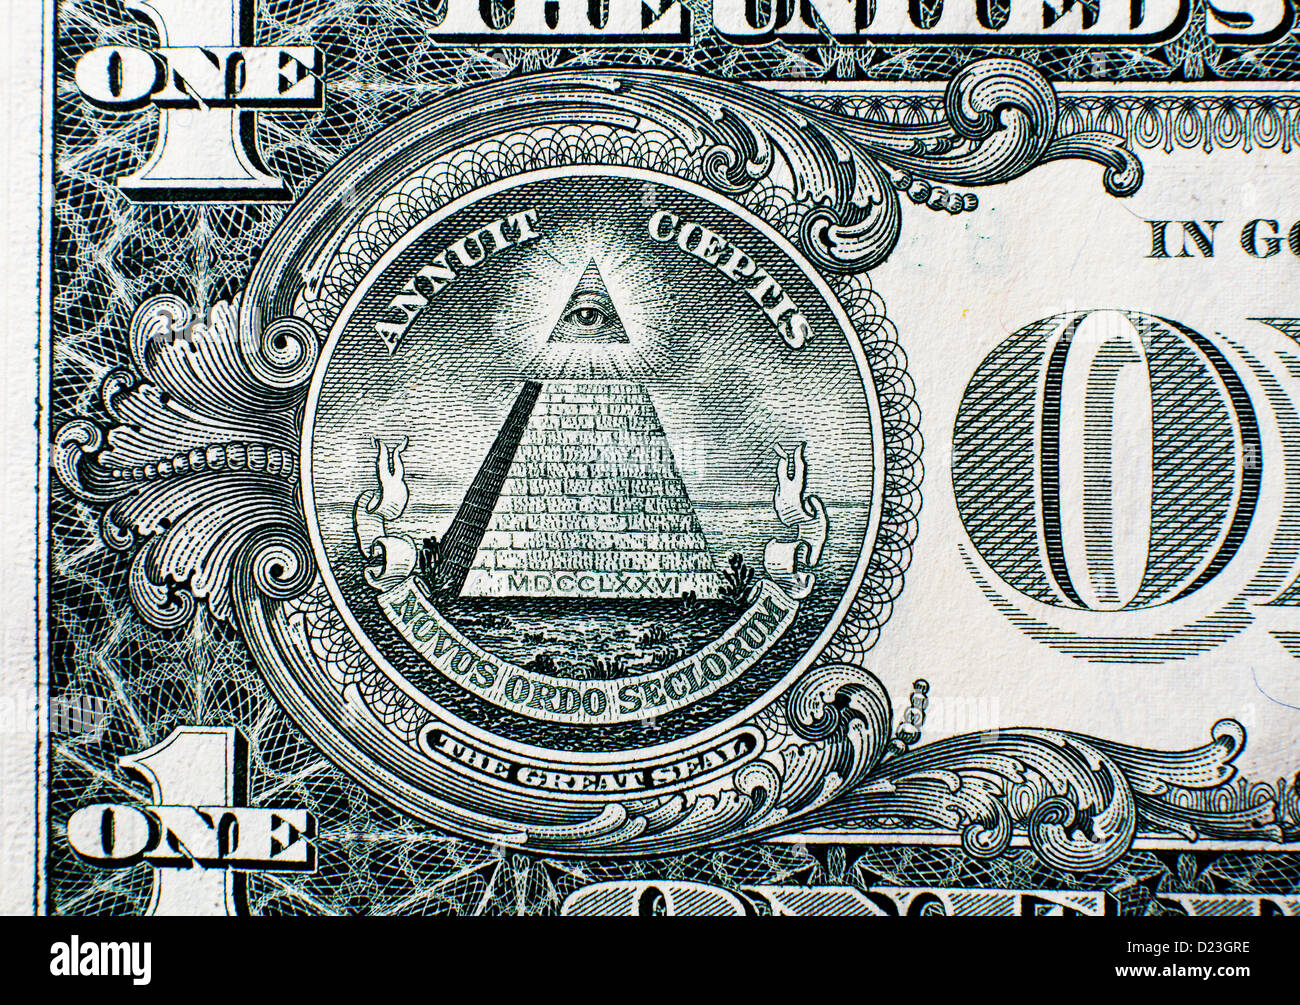 Berlin, Germany, the United States seal on the 1-dollar bill Stock Photo